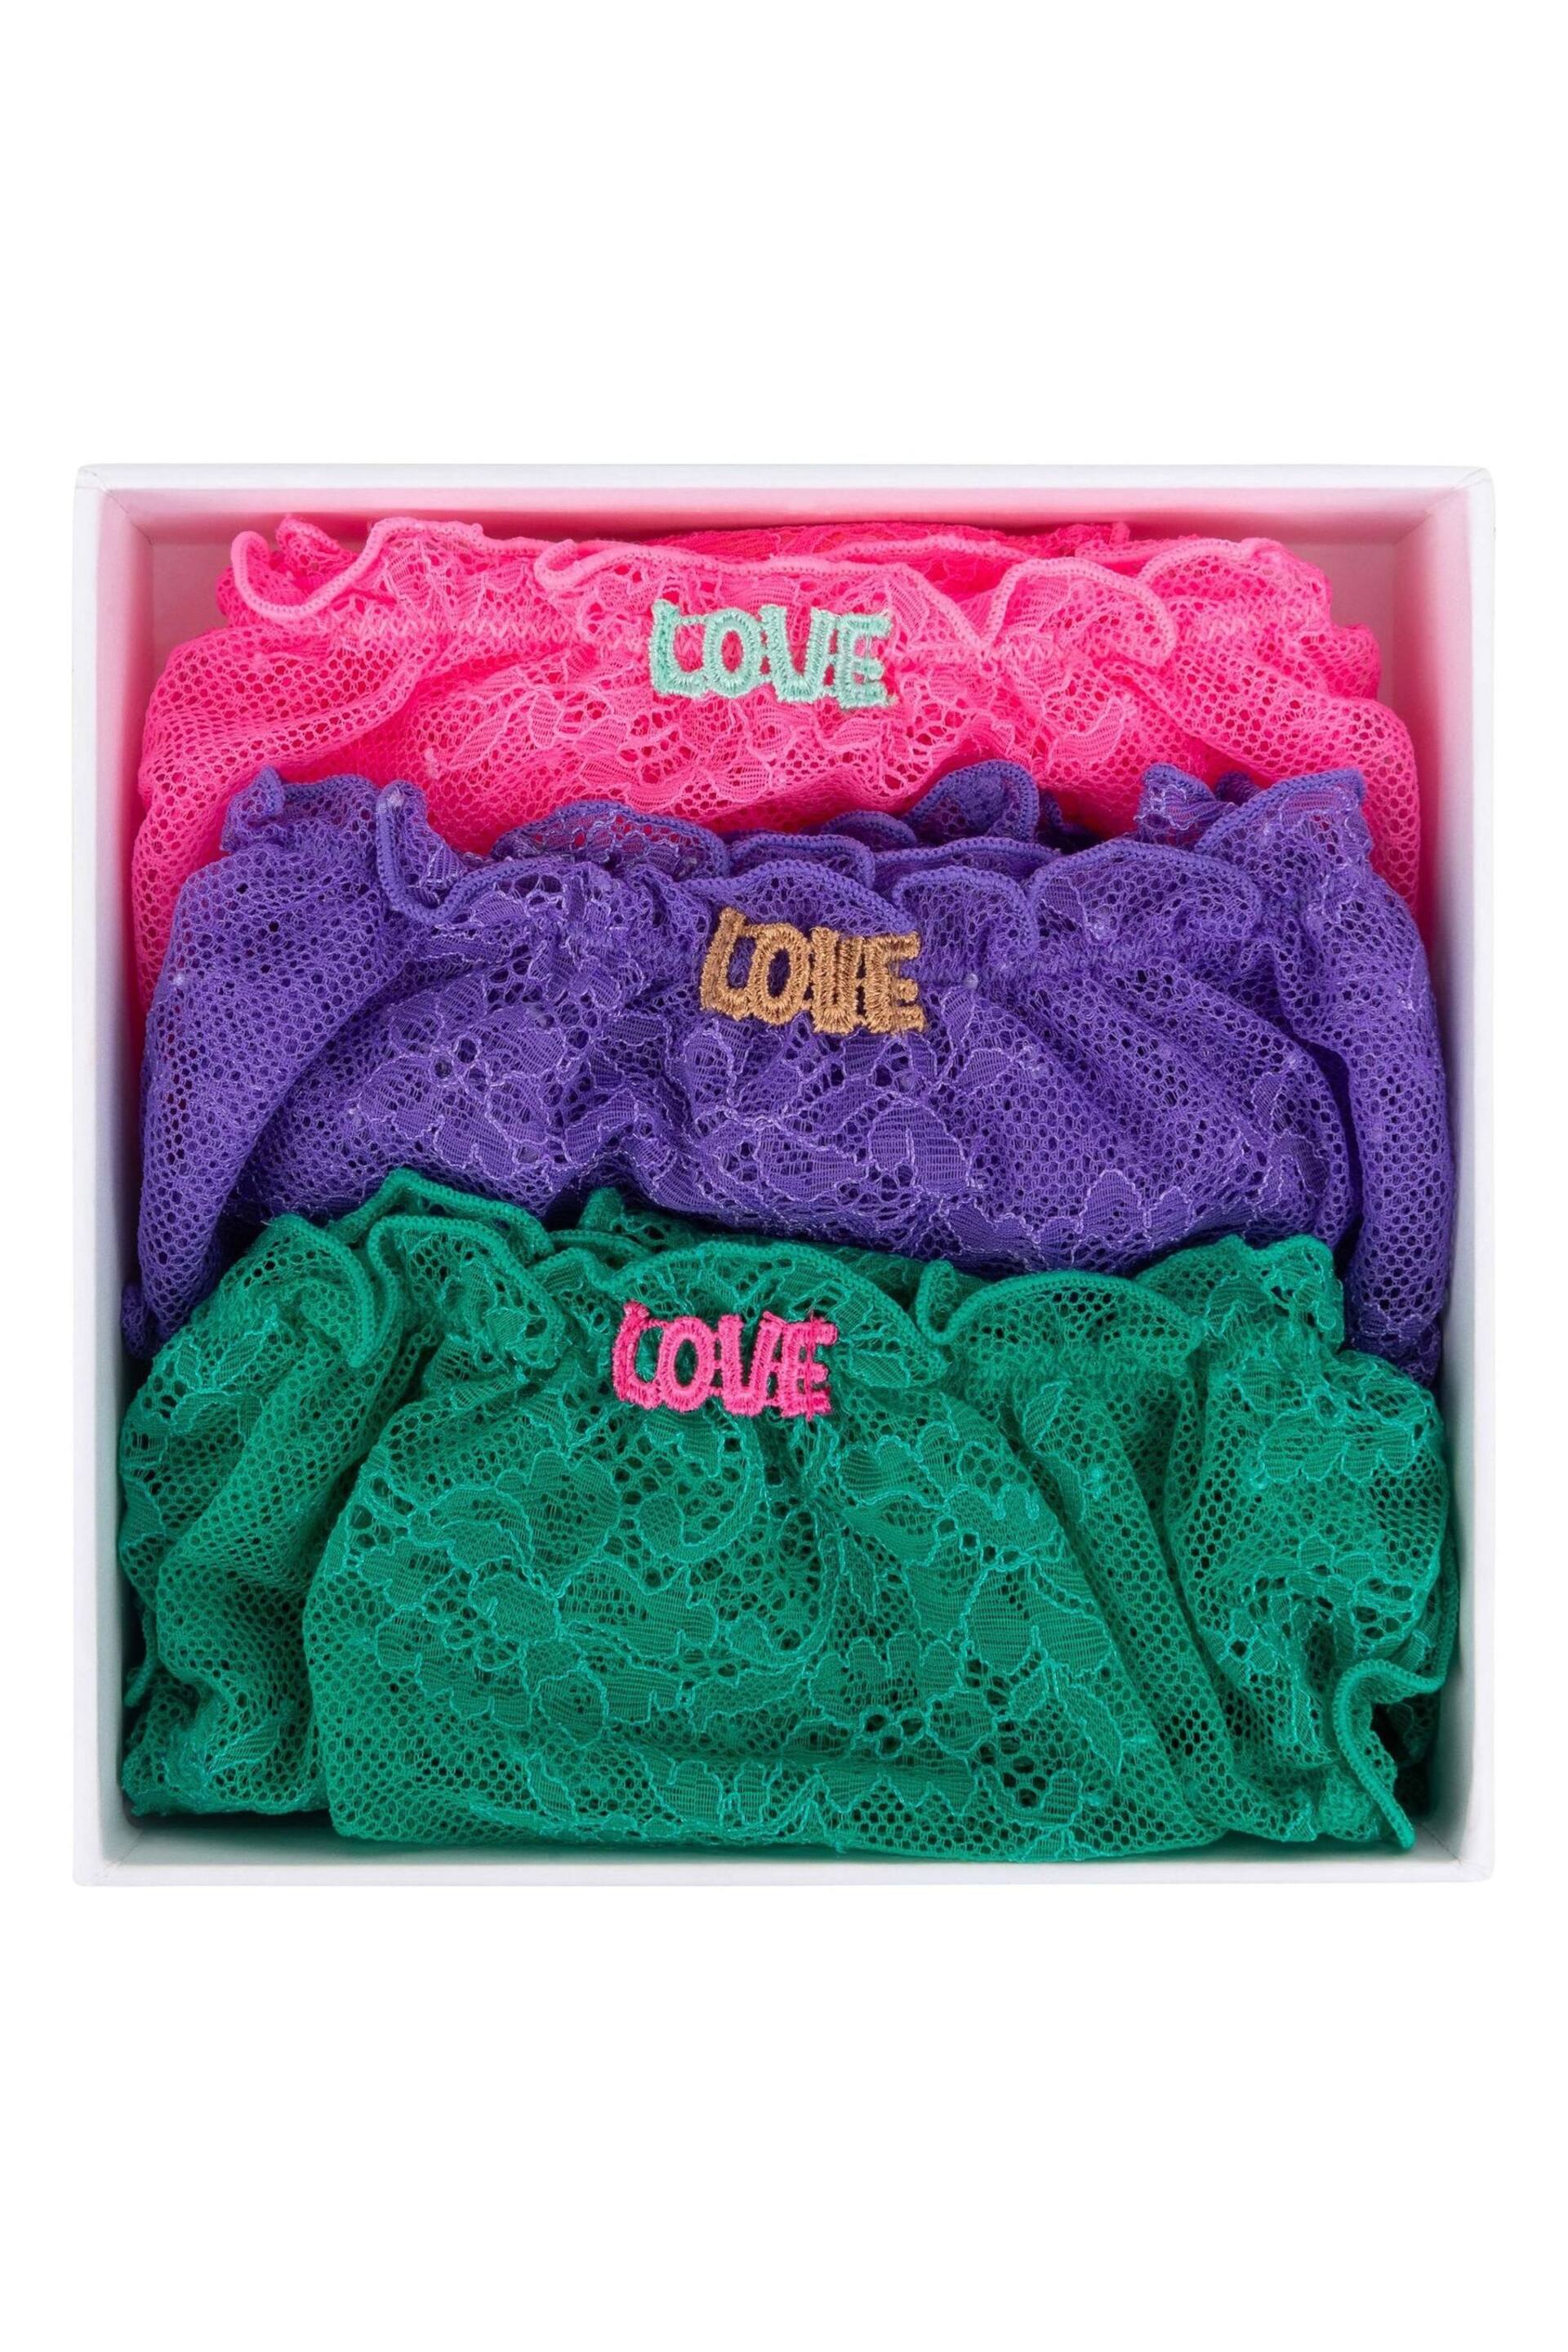 Love Stories Multi Full Brief Weekend Lola Lace Briefs 3 Pack - Image 4 of 7